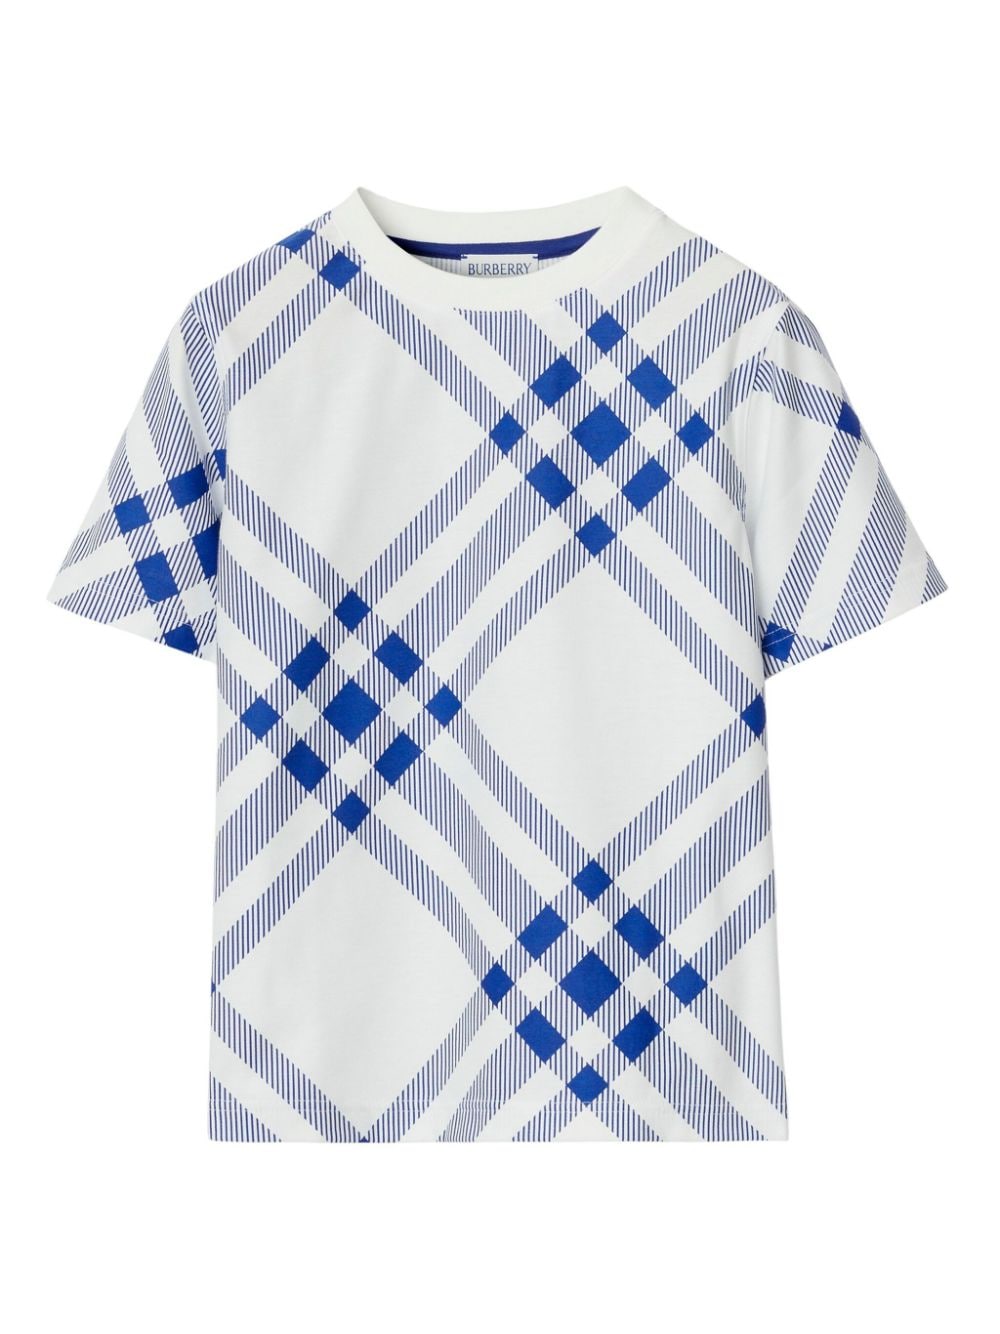 BURBERRY CHECKED COTTON T-SHIRT